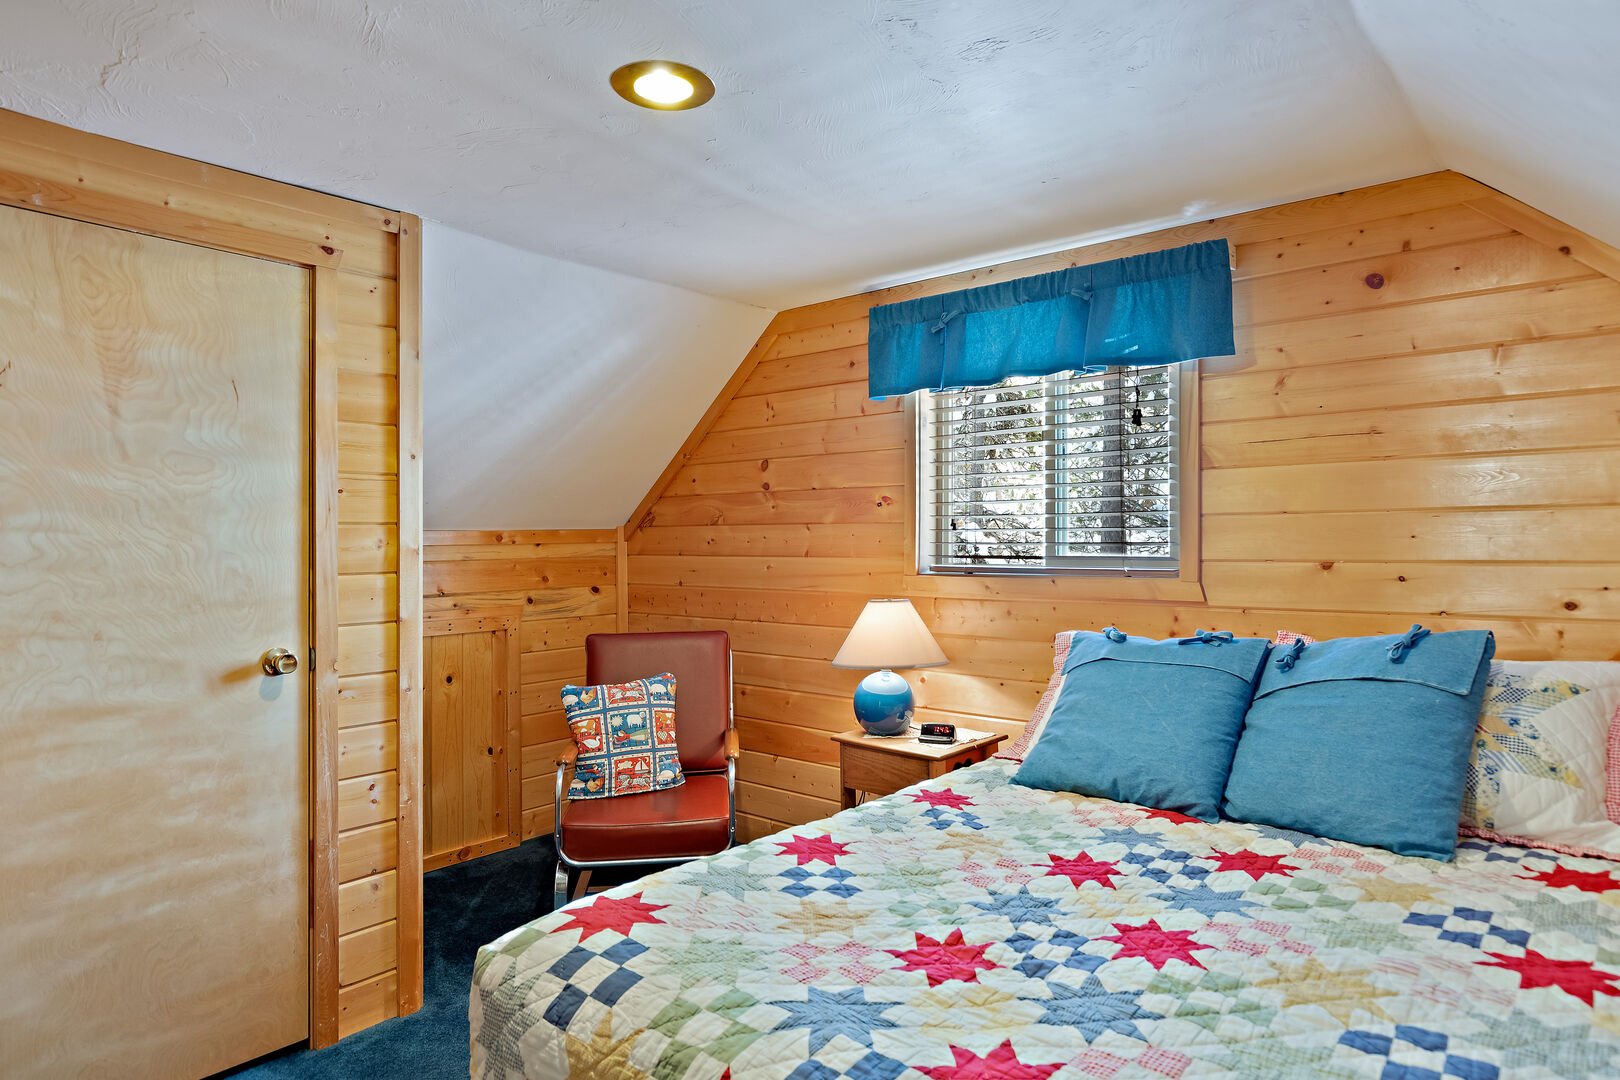 Restoration Pines ~ bedroom #2 on upper level w/ queen bed and private entrance to shared bathroom